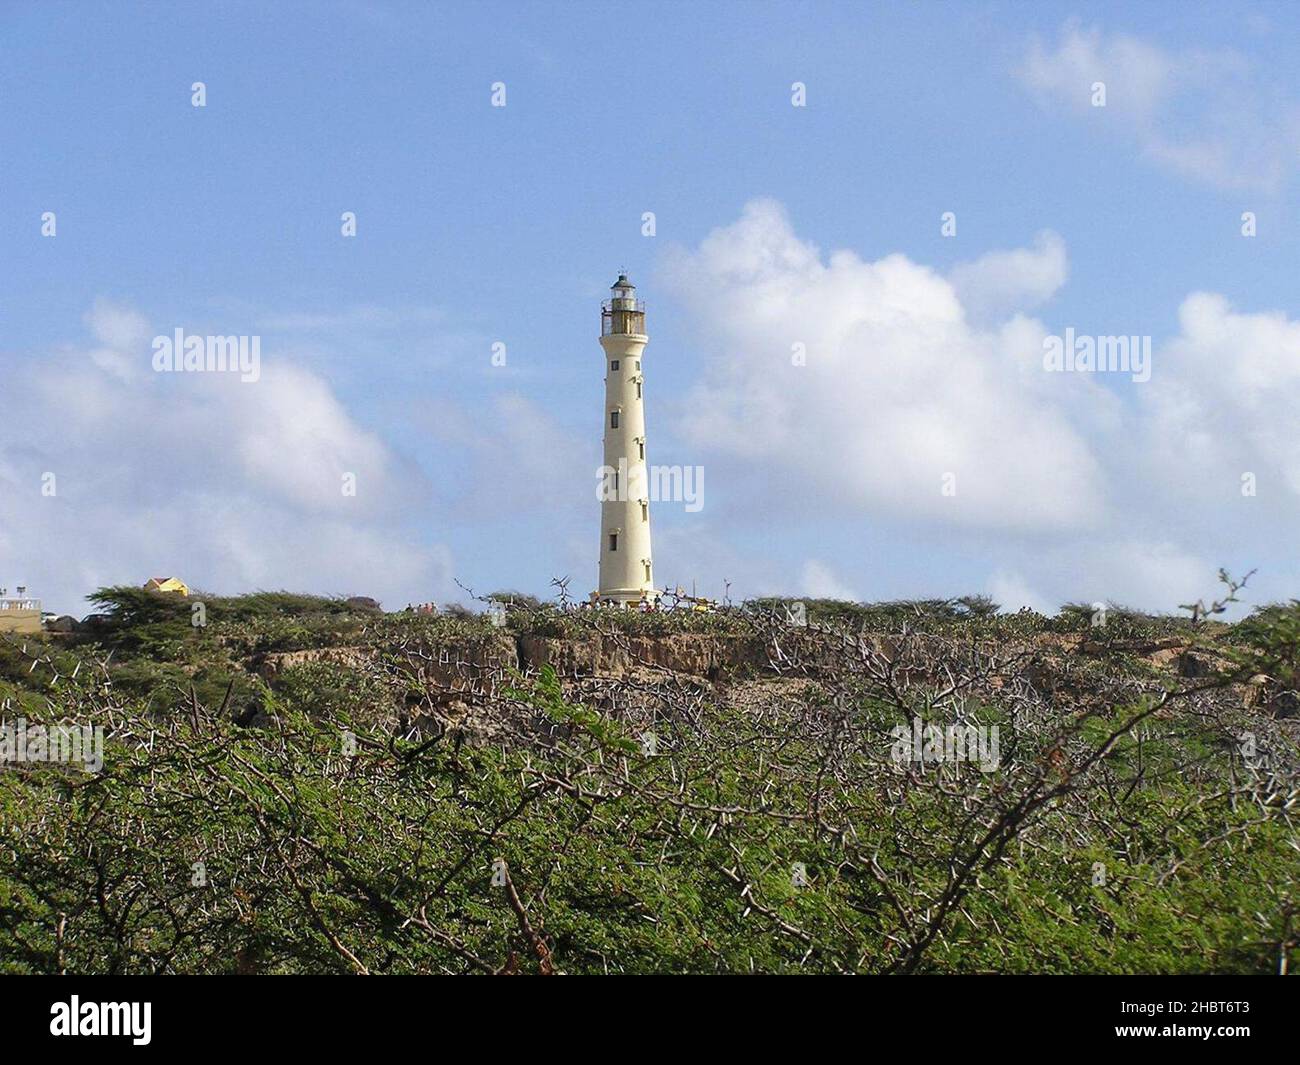 The California lighthouse on the northwest tip of Aruba gets its name from a steamship that wrecked nearby in 1891 ca.  26 July 2011 Stock Photo